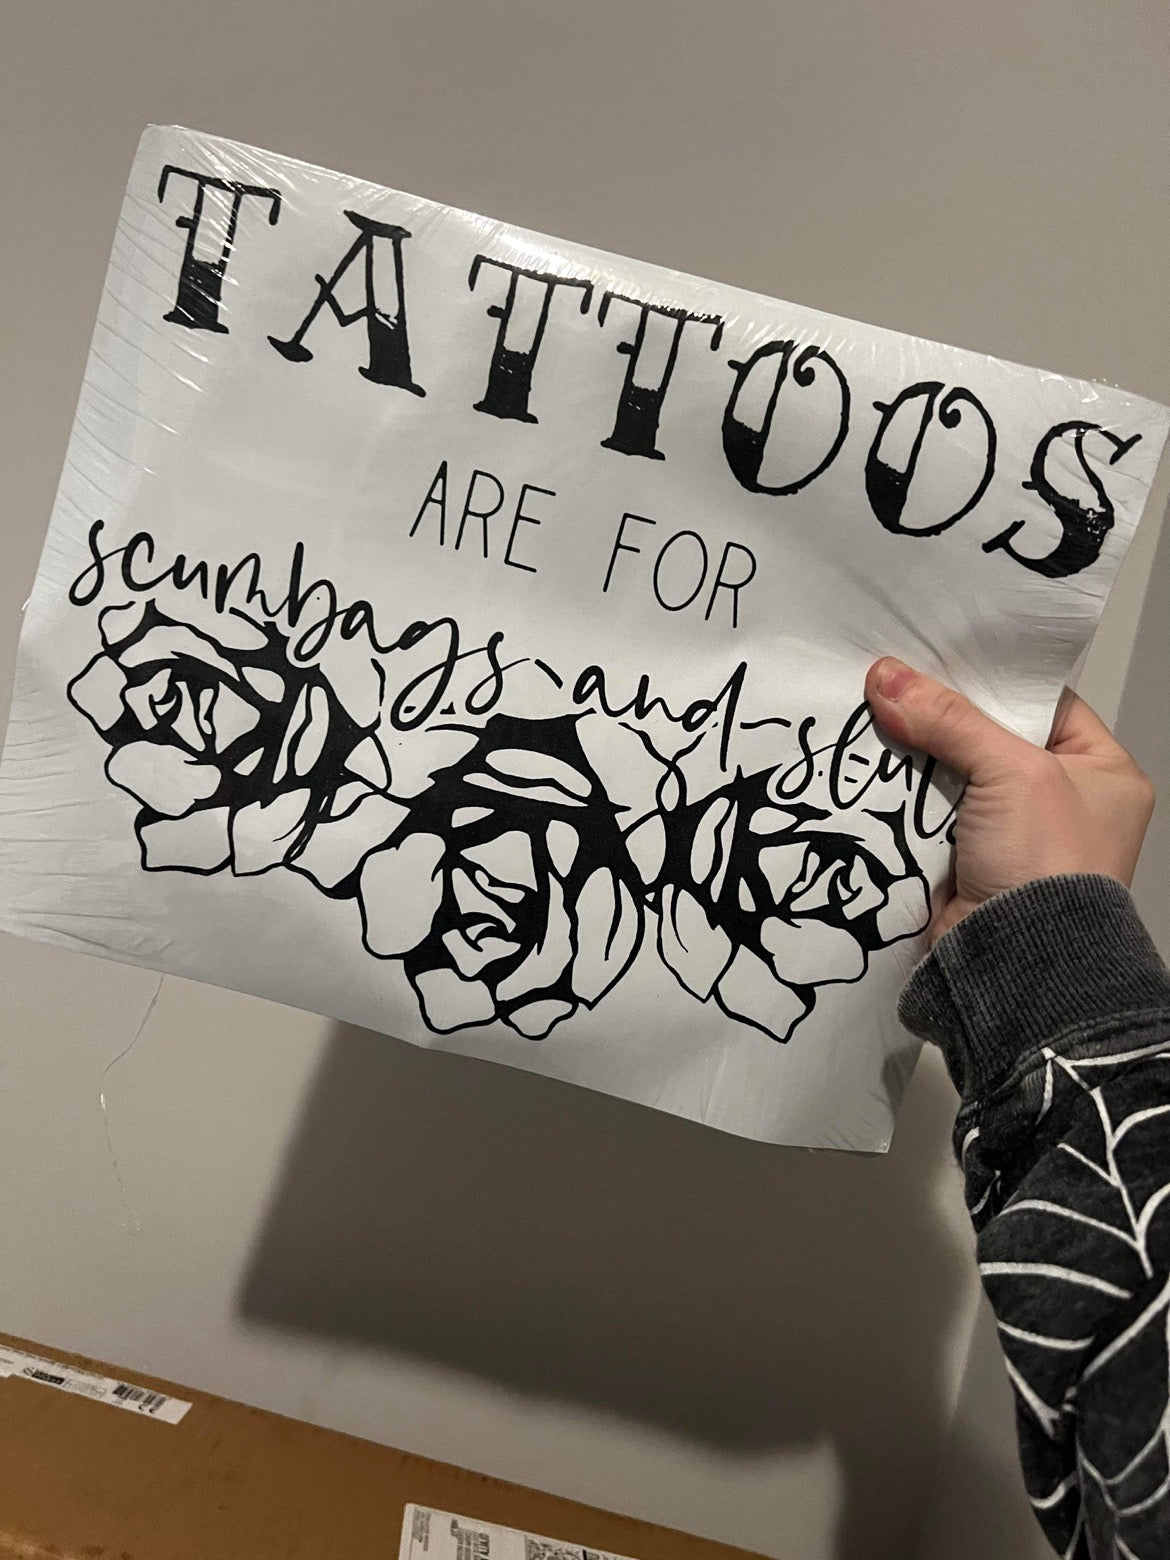 Tattoos are for scumbags & sluts (black) FLAWED